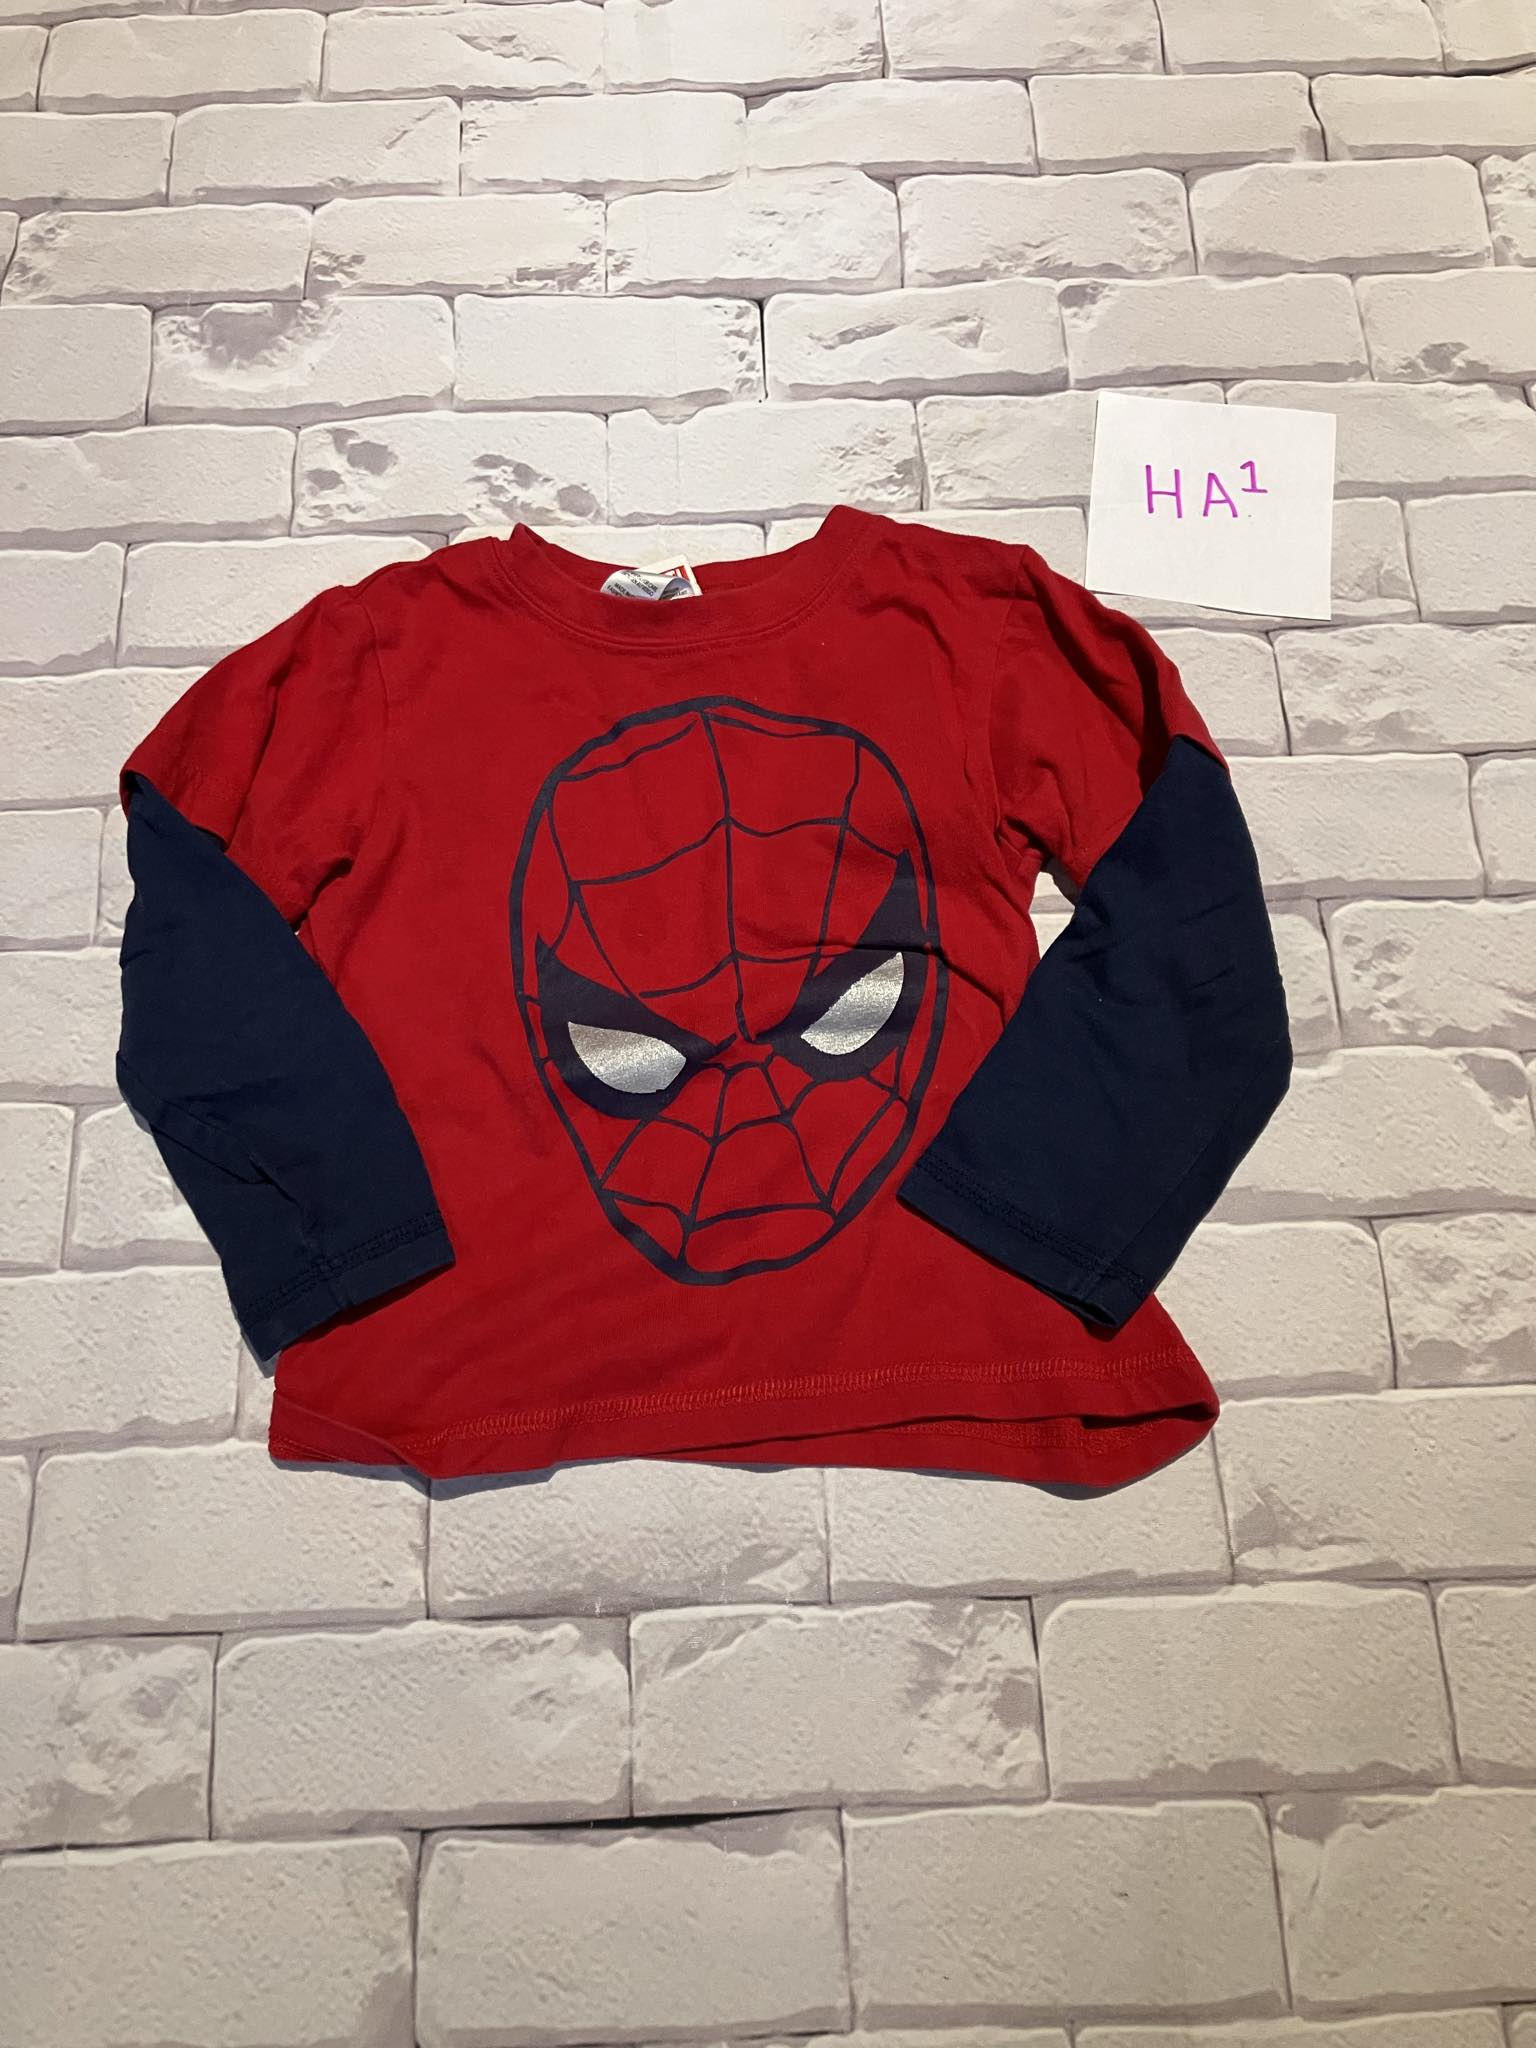 Boys Top Size 3T